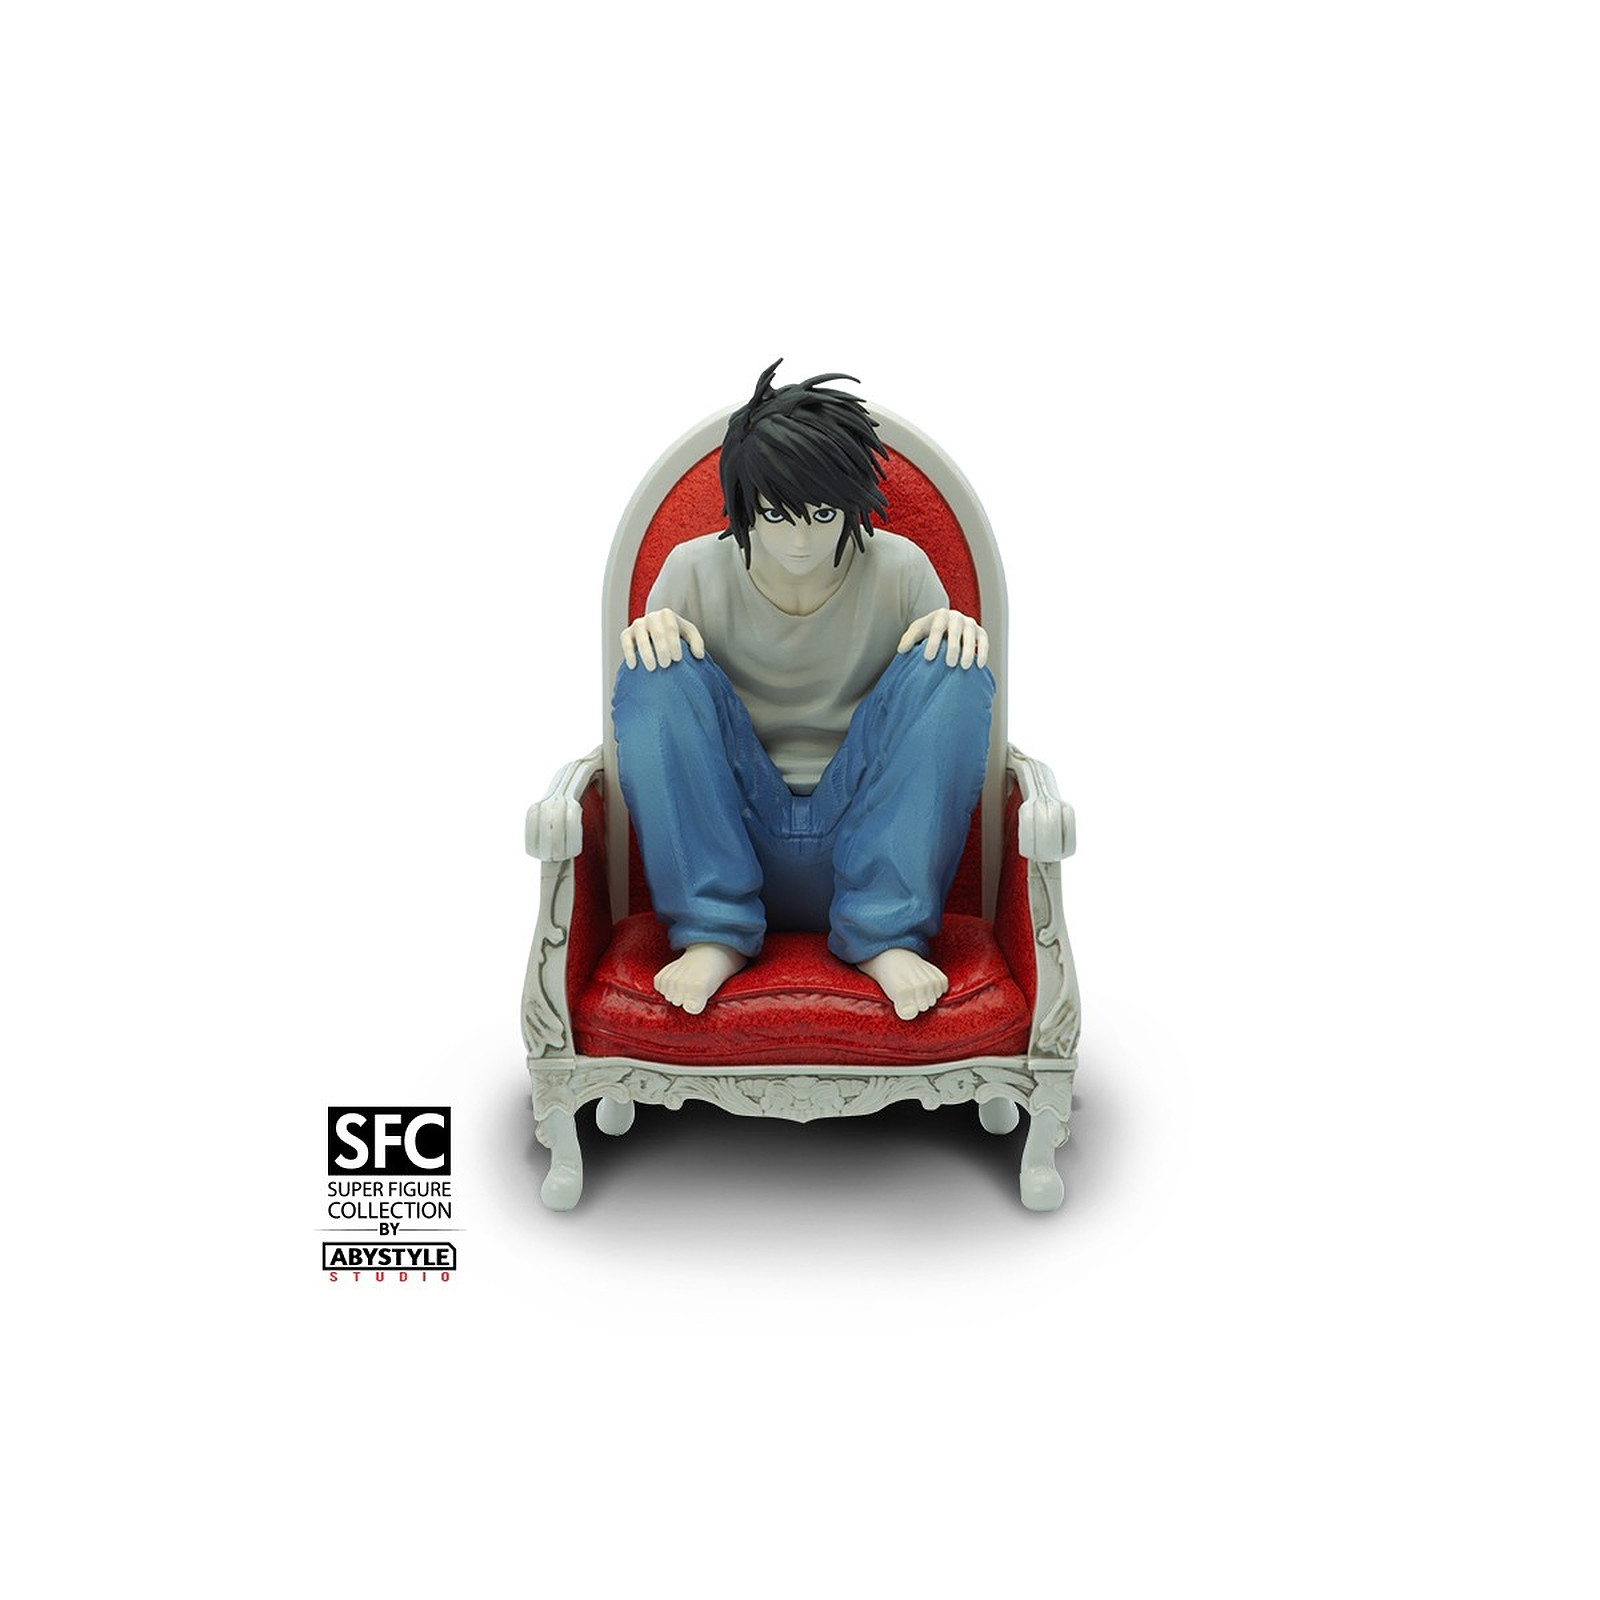 Death Note - Figurine L - Figurines Abystyle